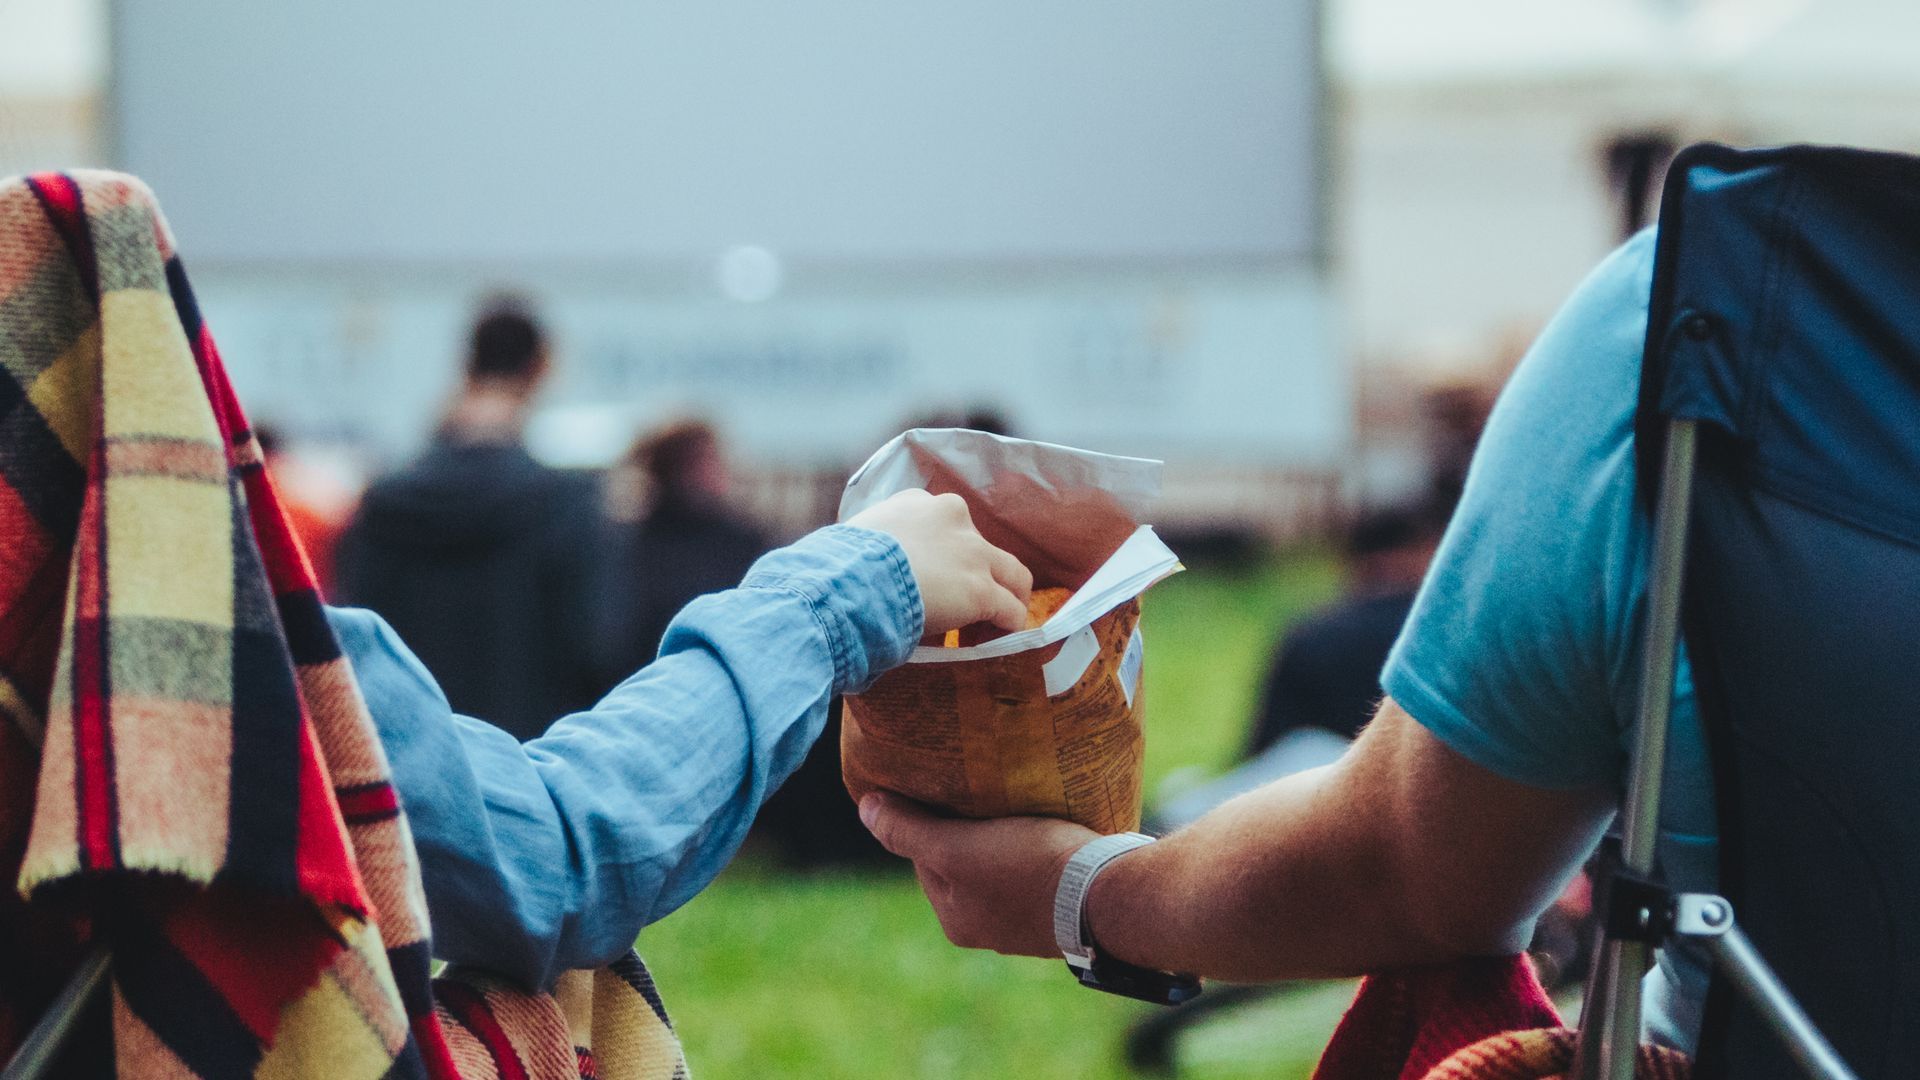 two people sharing a bag of chips at an outdoor movie theater